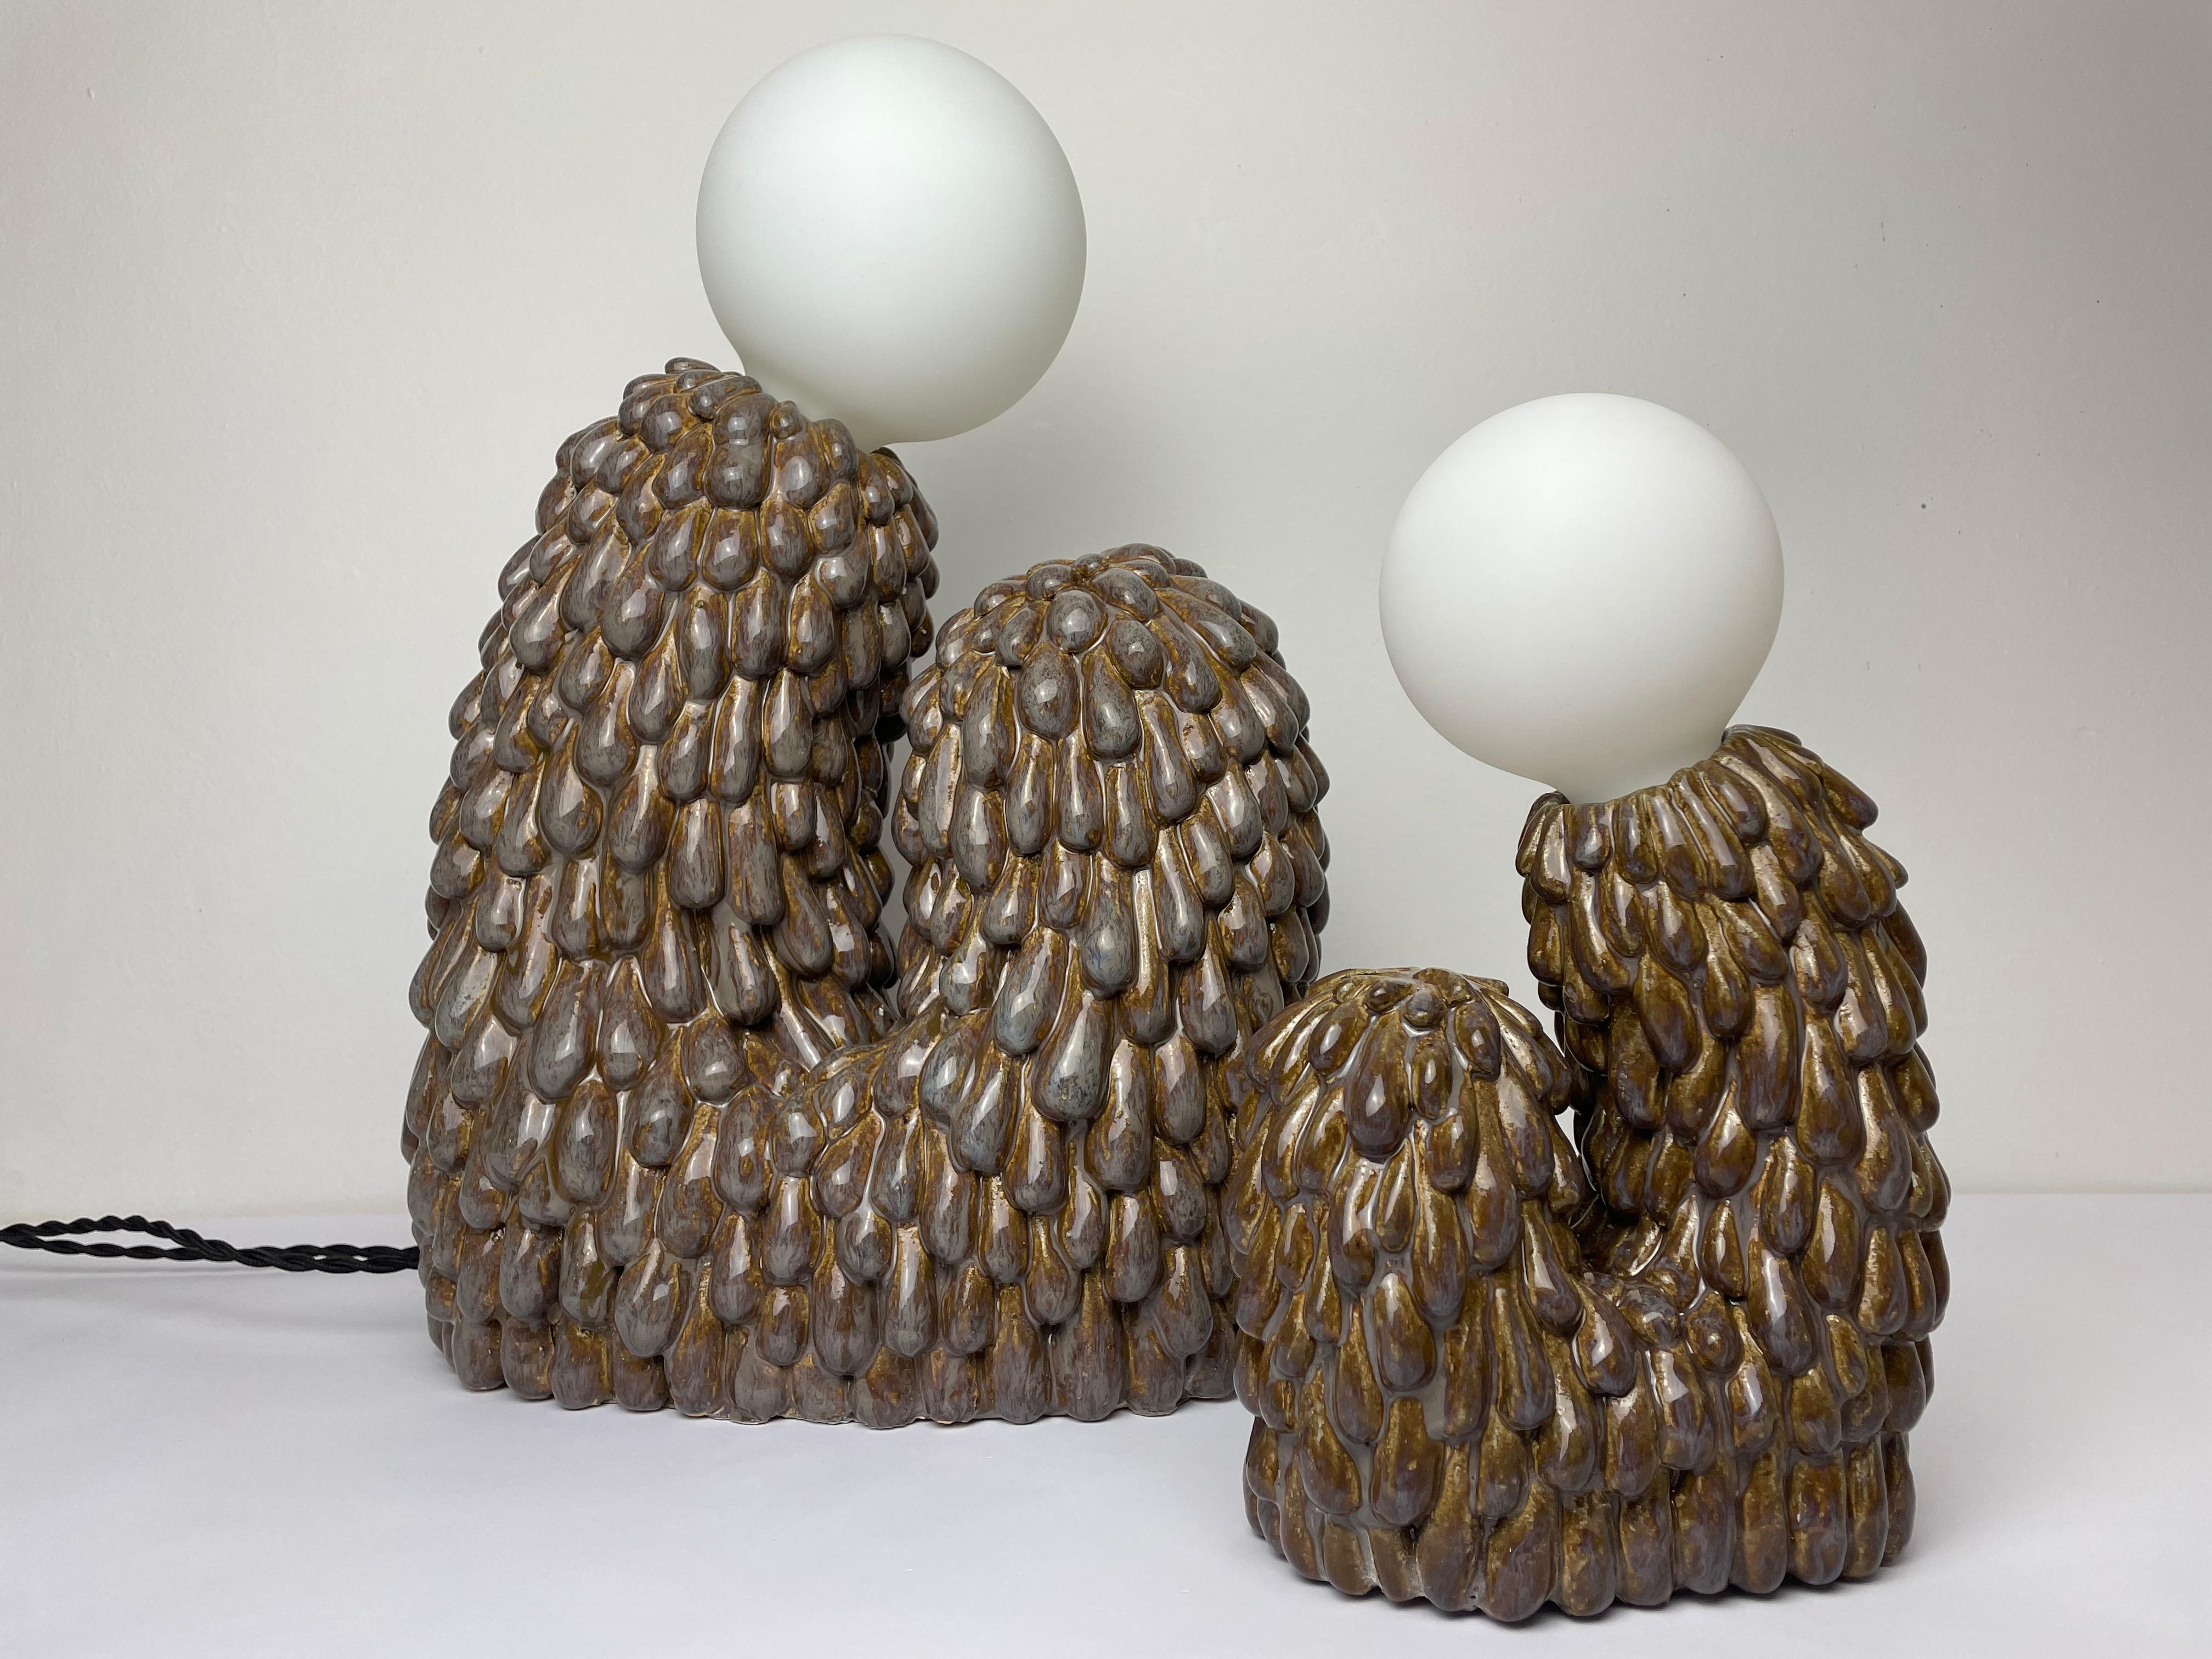 Set of 2 Evolve lamps by HS Studio
Morphic Collection
Dimensions: 43 x 40 x 15cm 
 28 x 18 x 9cm
Materials: Ceramic

Hannah Simpson is a ceramic artist, based in Kent, UK. With a passion for creating unique items, Hannah's work continues to